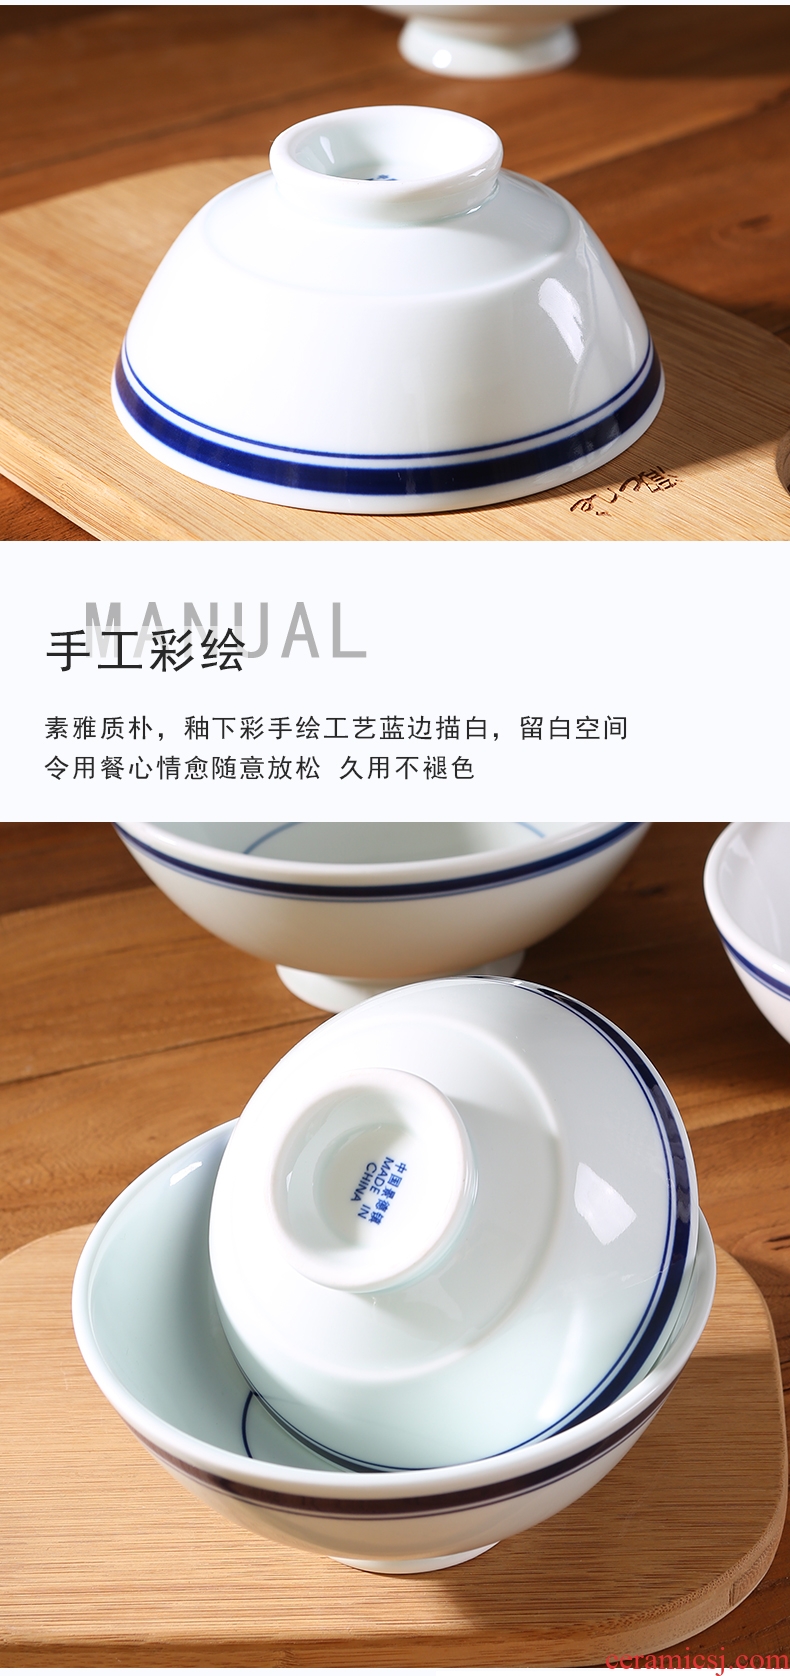 Jingdezhen ceramic bowl home eat tall bowl contracted japanese-style tableware restoring ancient ways is large salad bowl noodles soup bowl